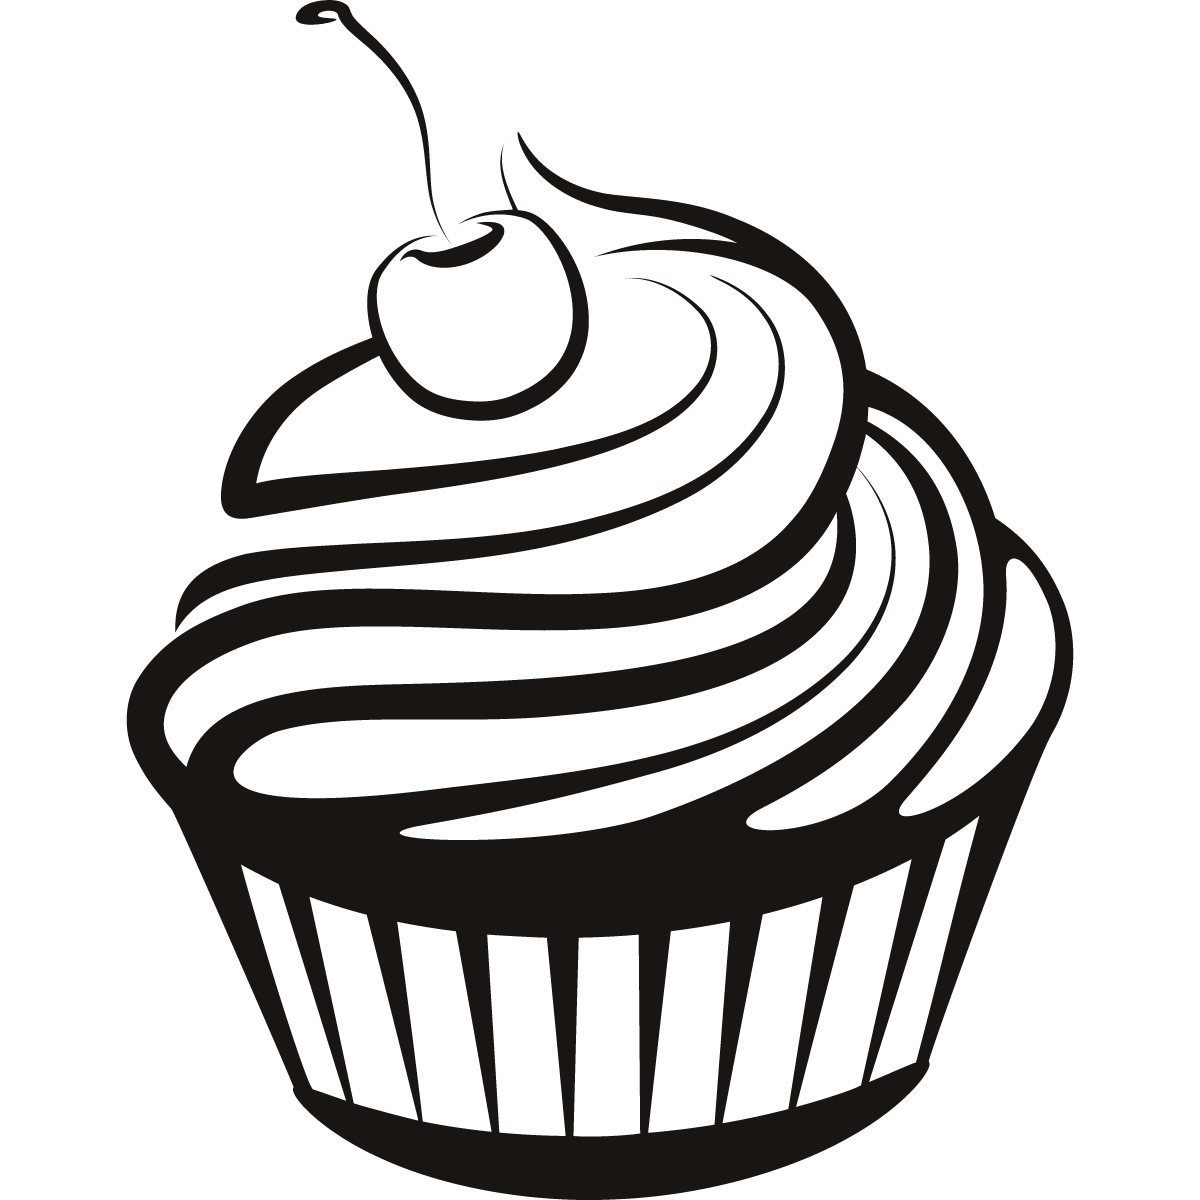 Cupcake Line Drawing - Clipart library